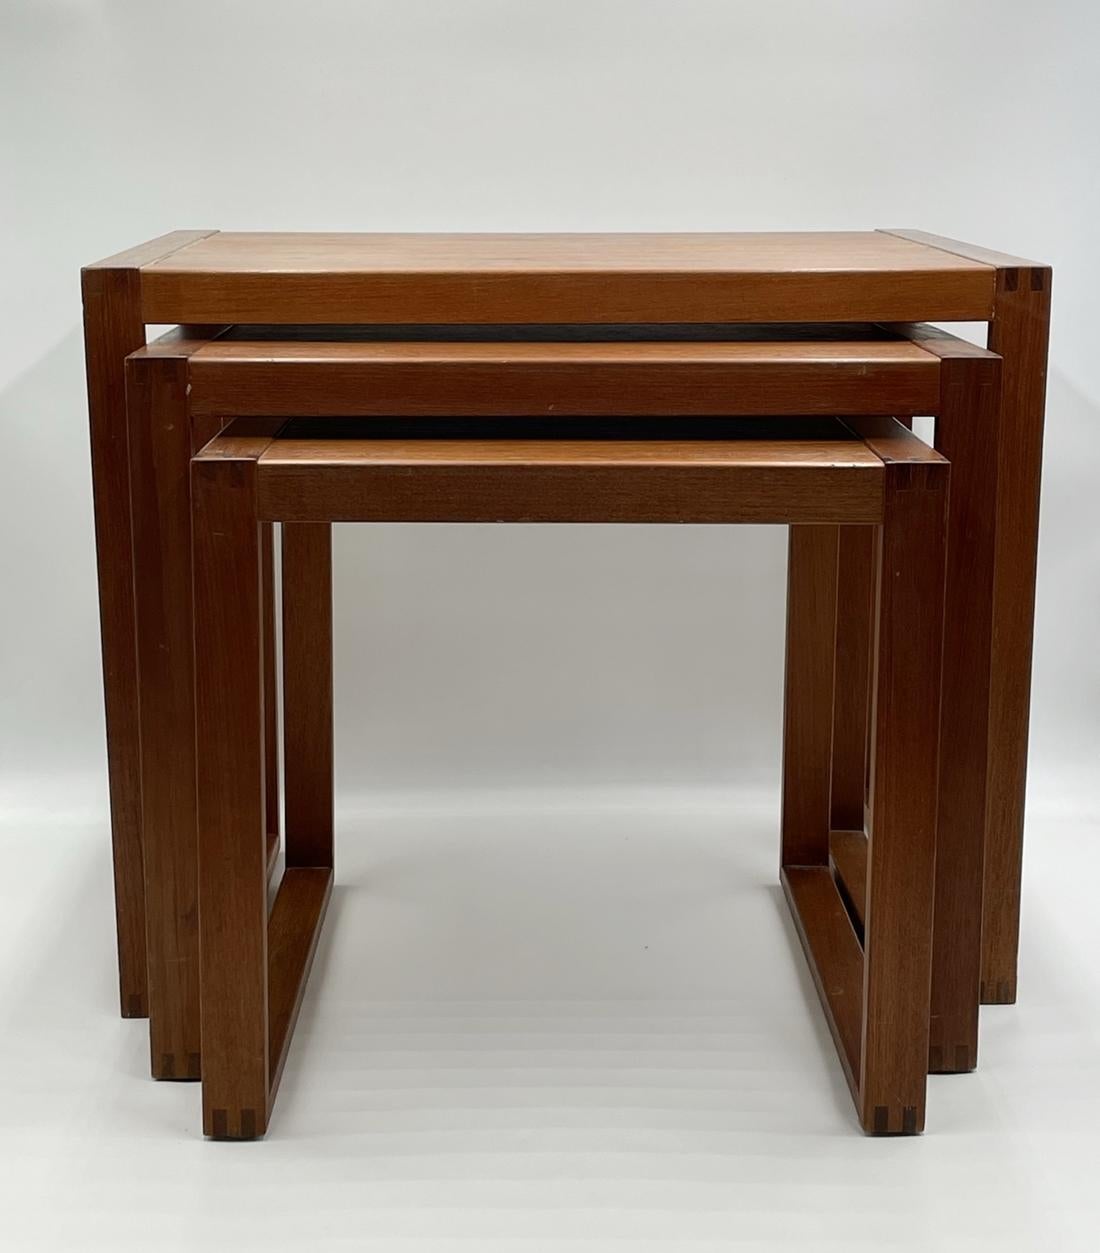 Introducing the Set of Three Danish Modern Teak Nesting Tables by Vi-Ma Mobler - the perfect addition to your living room or office space. Crafted with high-quality teak wood, these beautifully designed nesting tables offer both style and